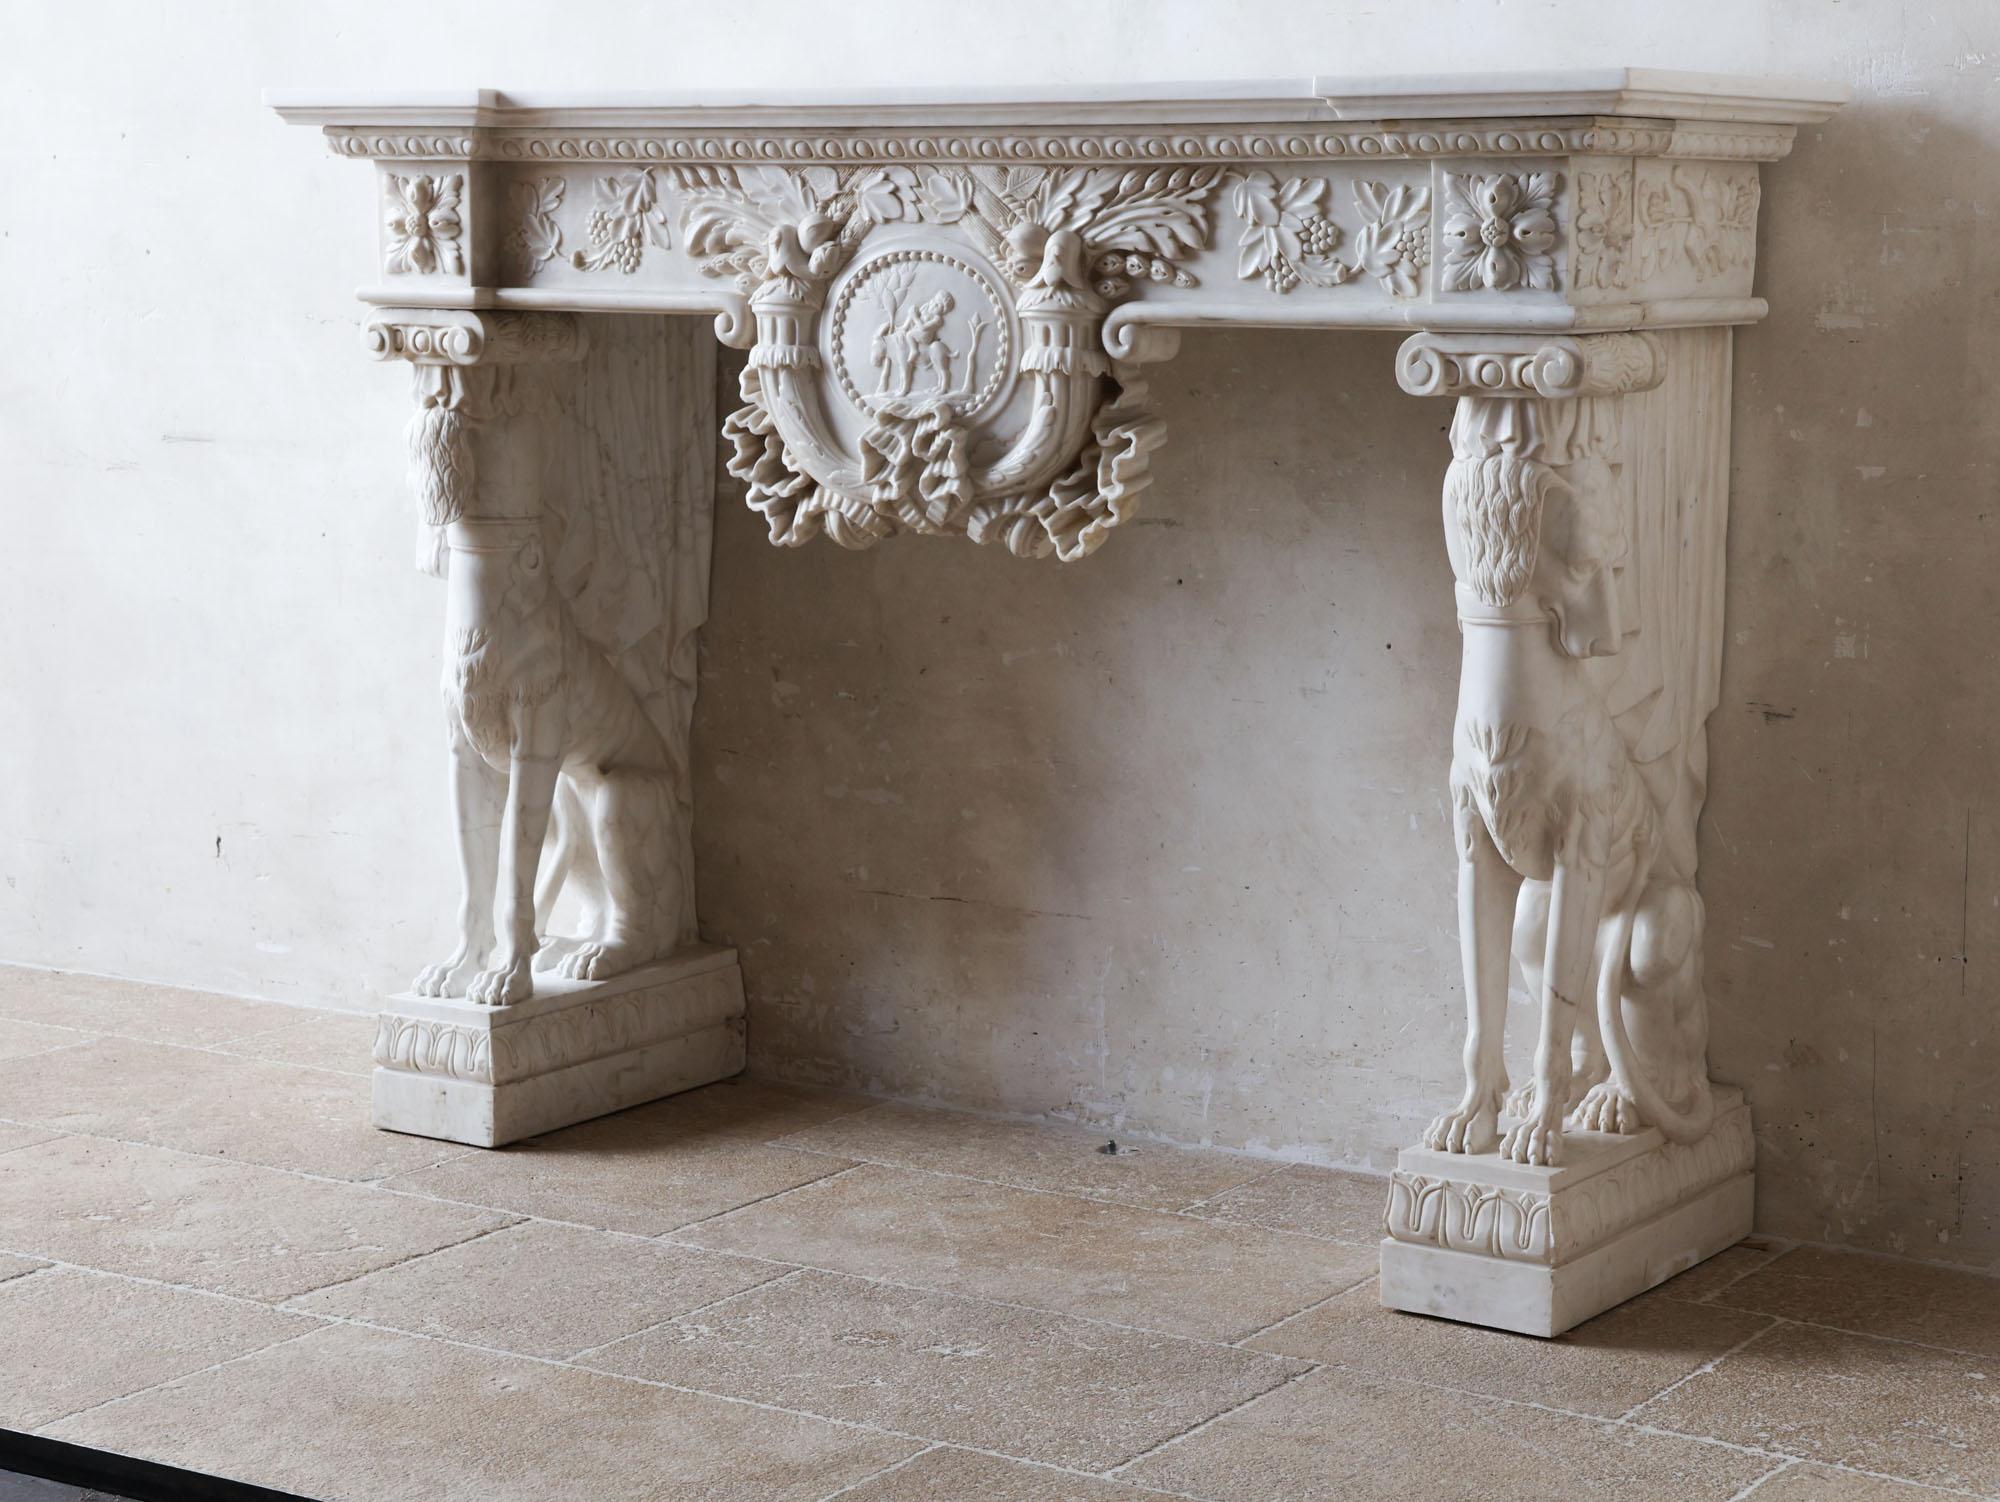 19th Century A Rich and Ornate Monumental Mantelpiece Italian Renaissance Revival Style For Sale